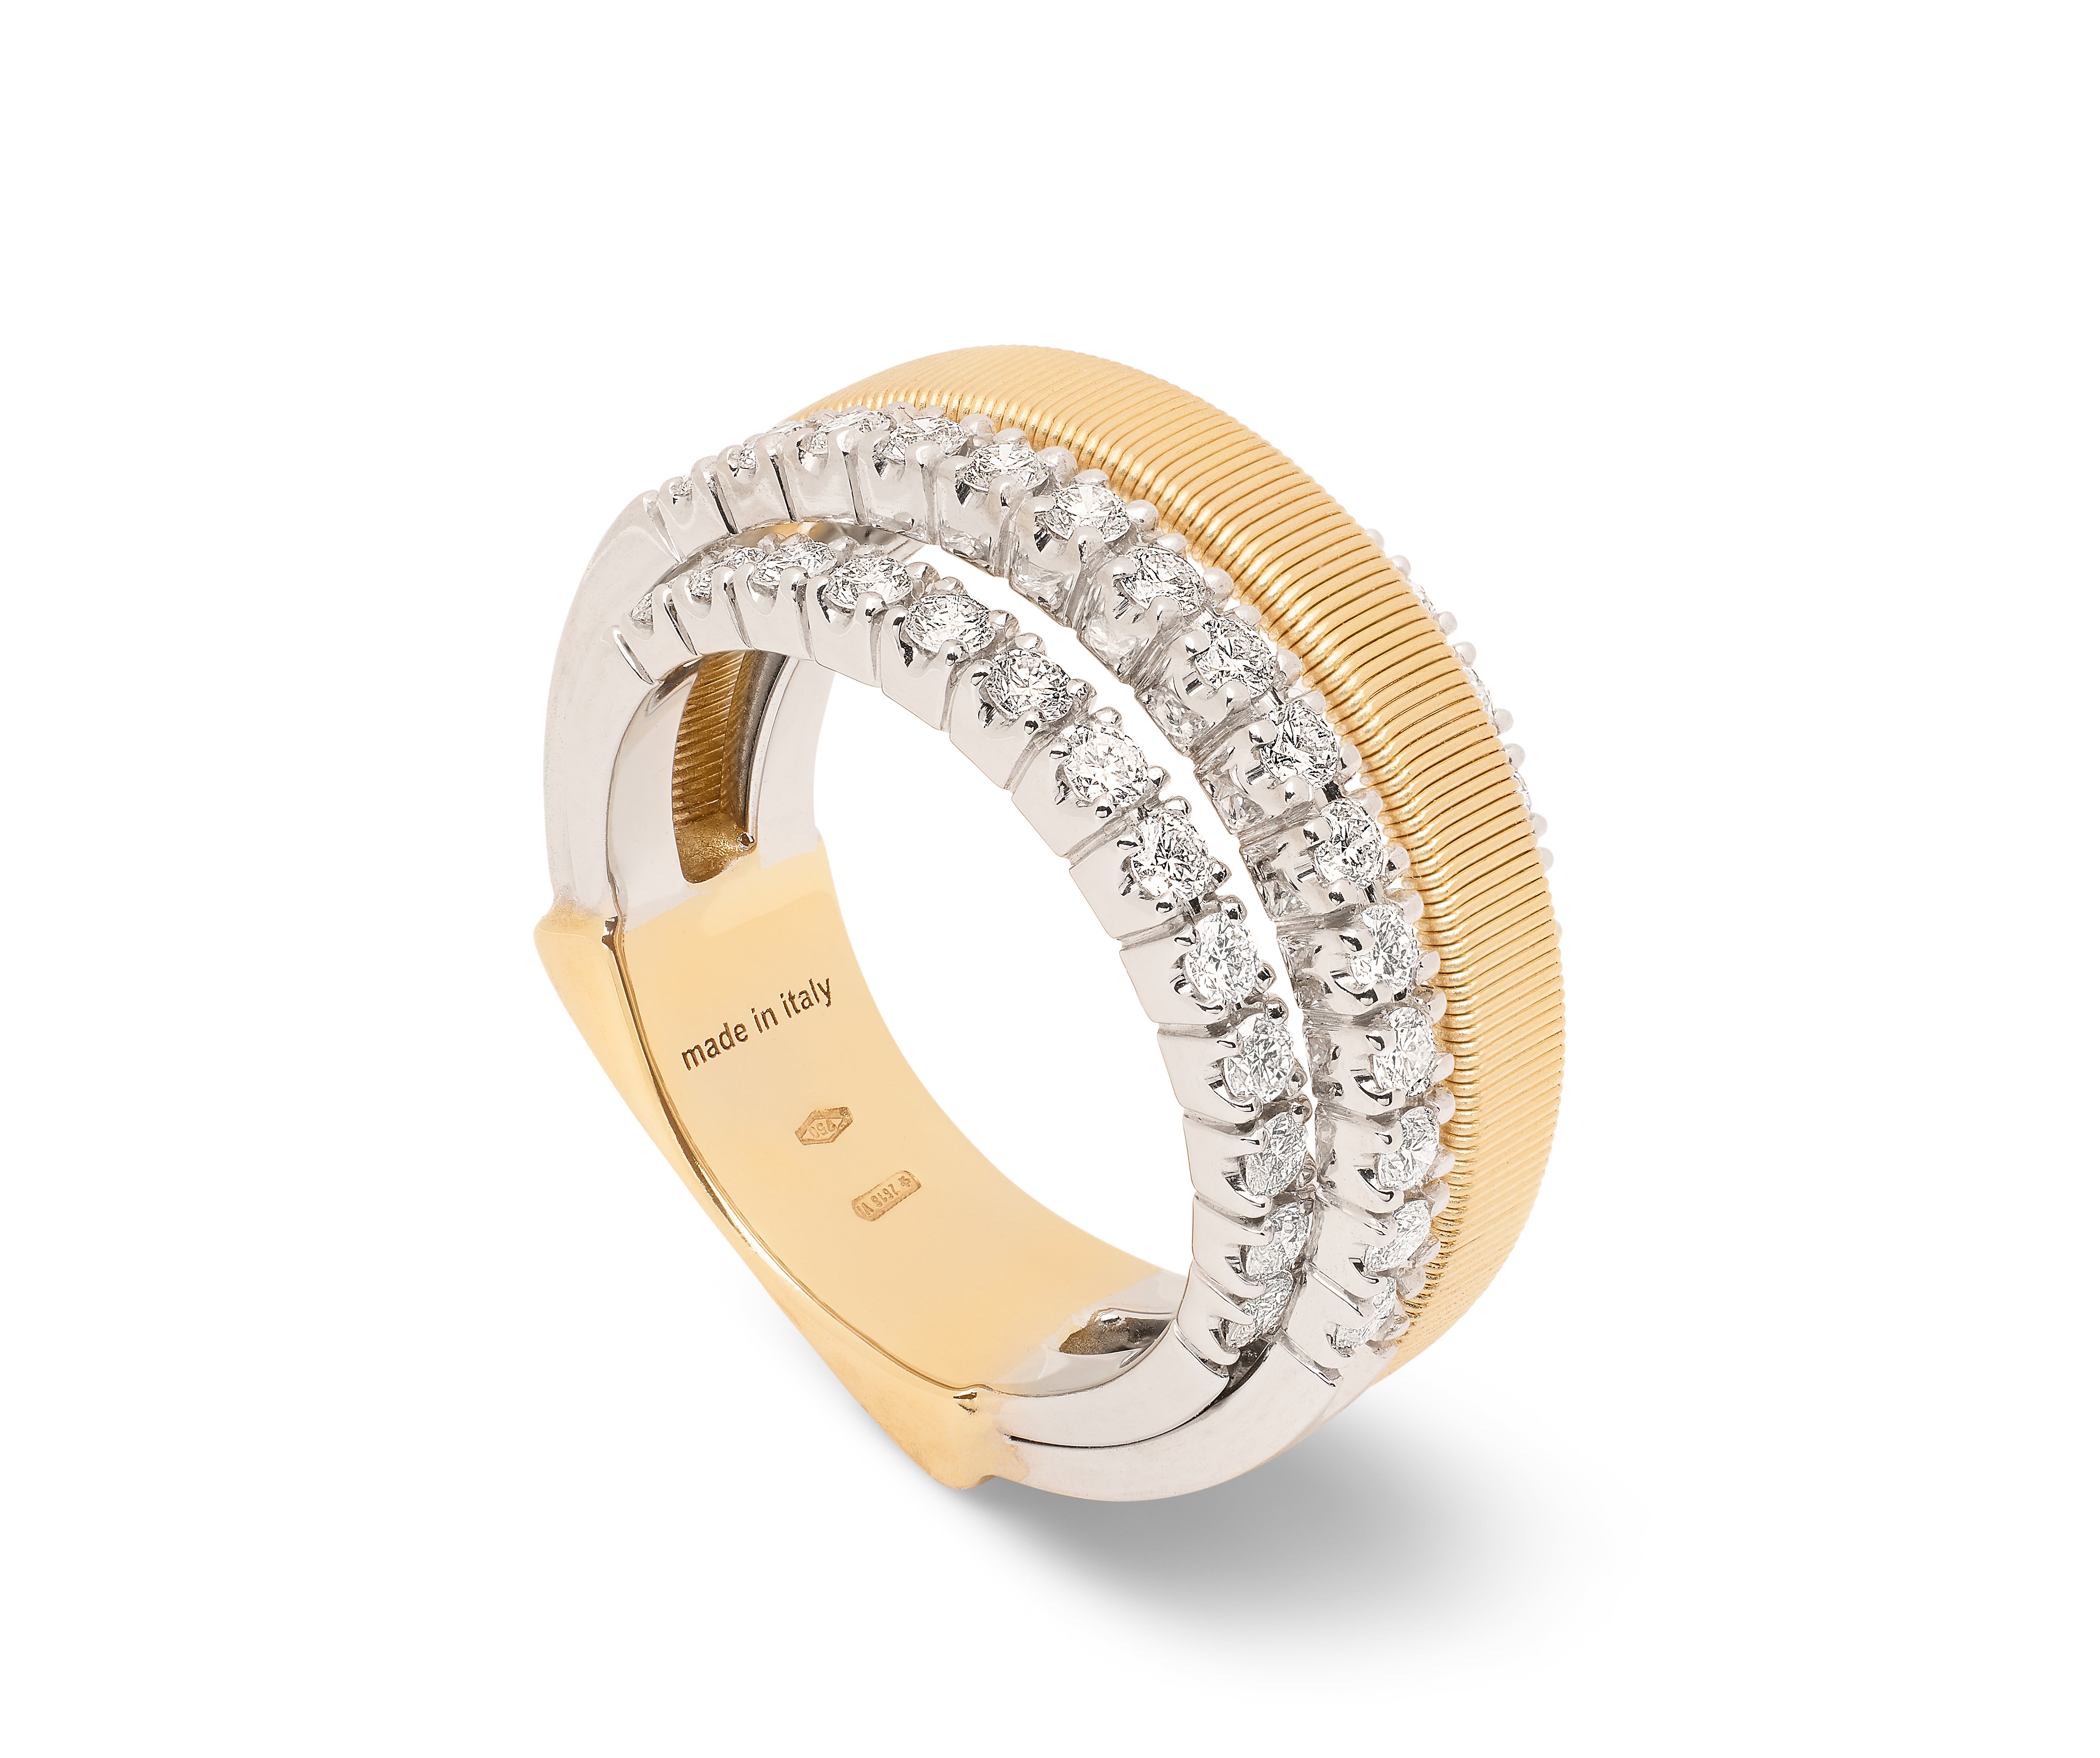 18K YELLOW AND WHITE GOLD DIAMOND RING FROM THE MASAI COLLECTION 1.23CT